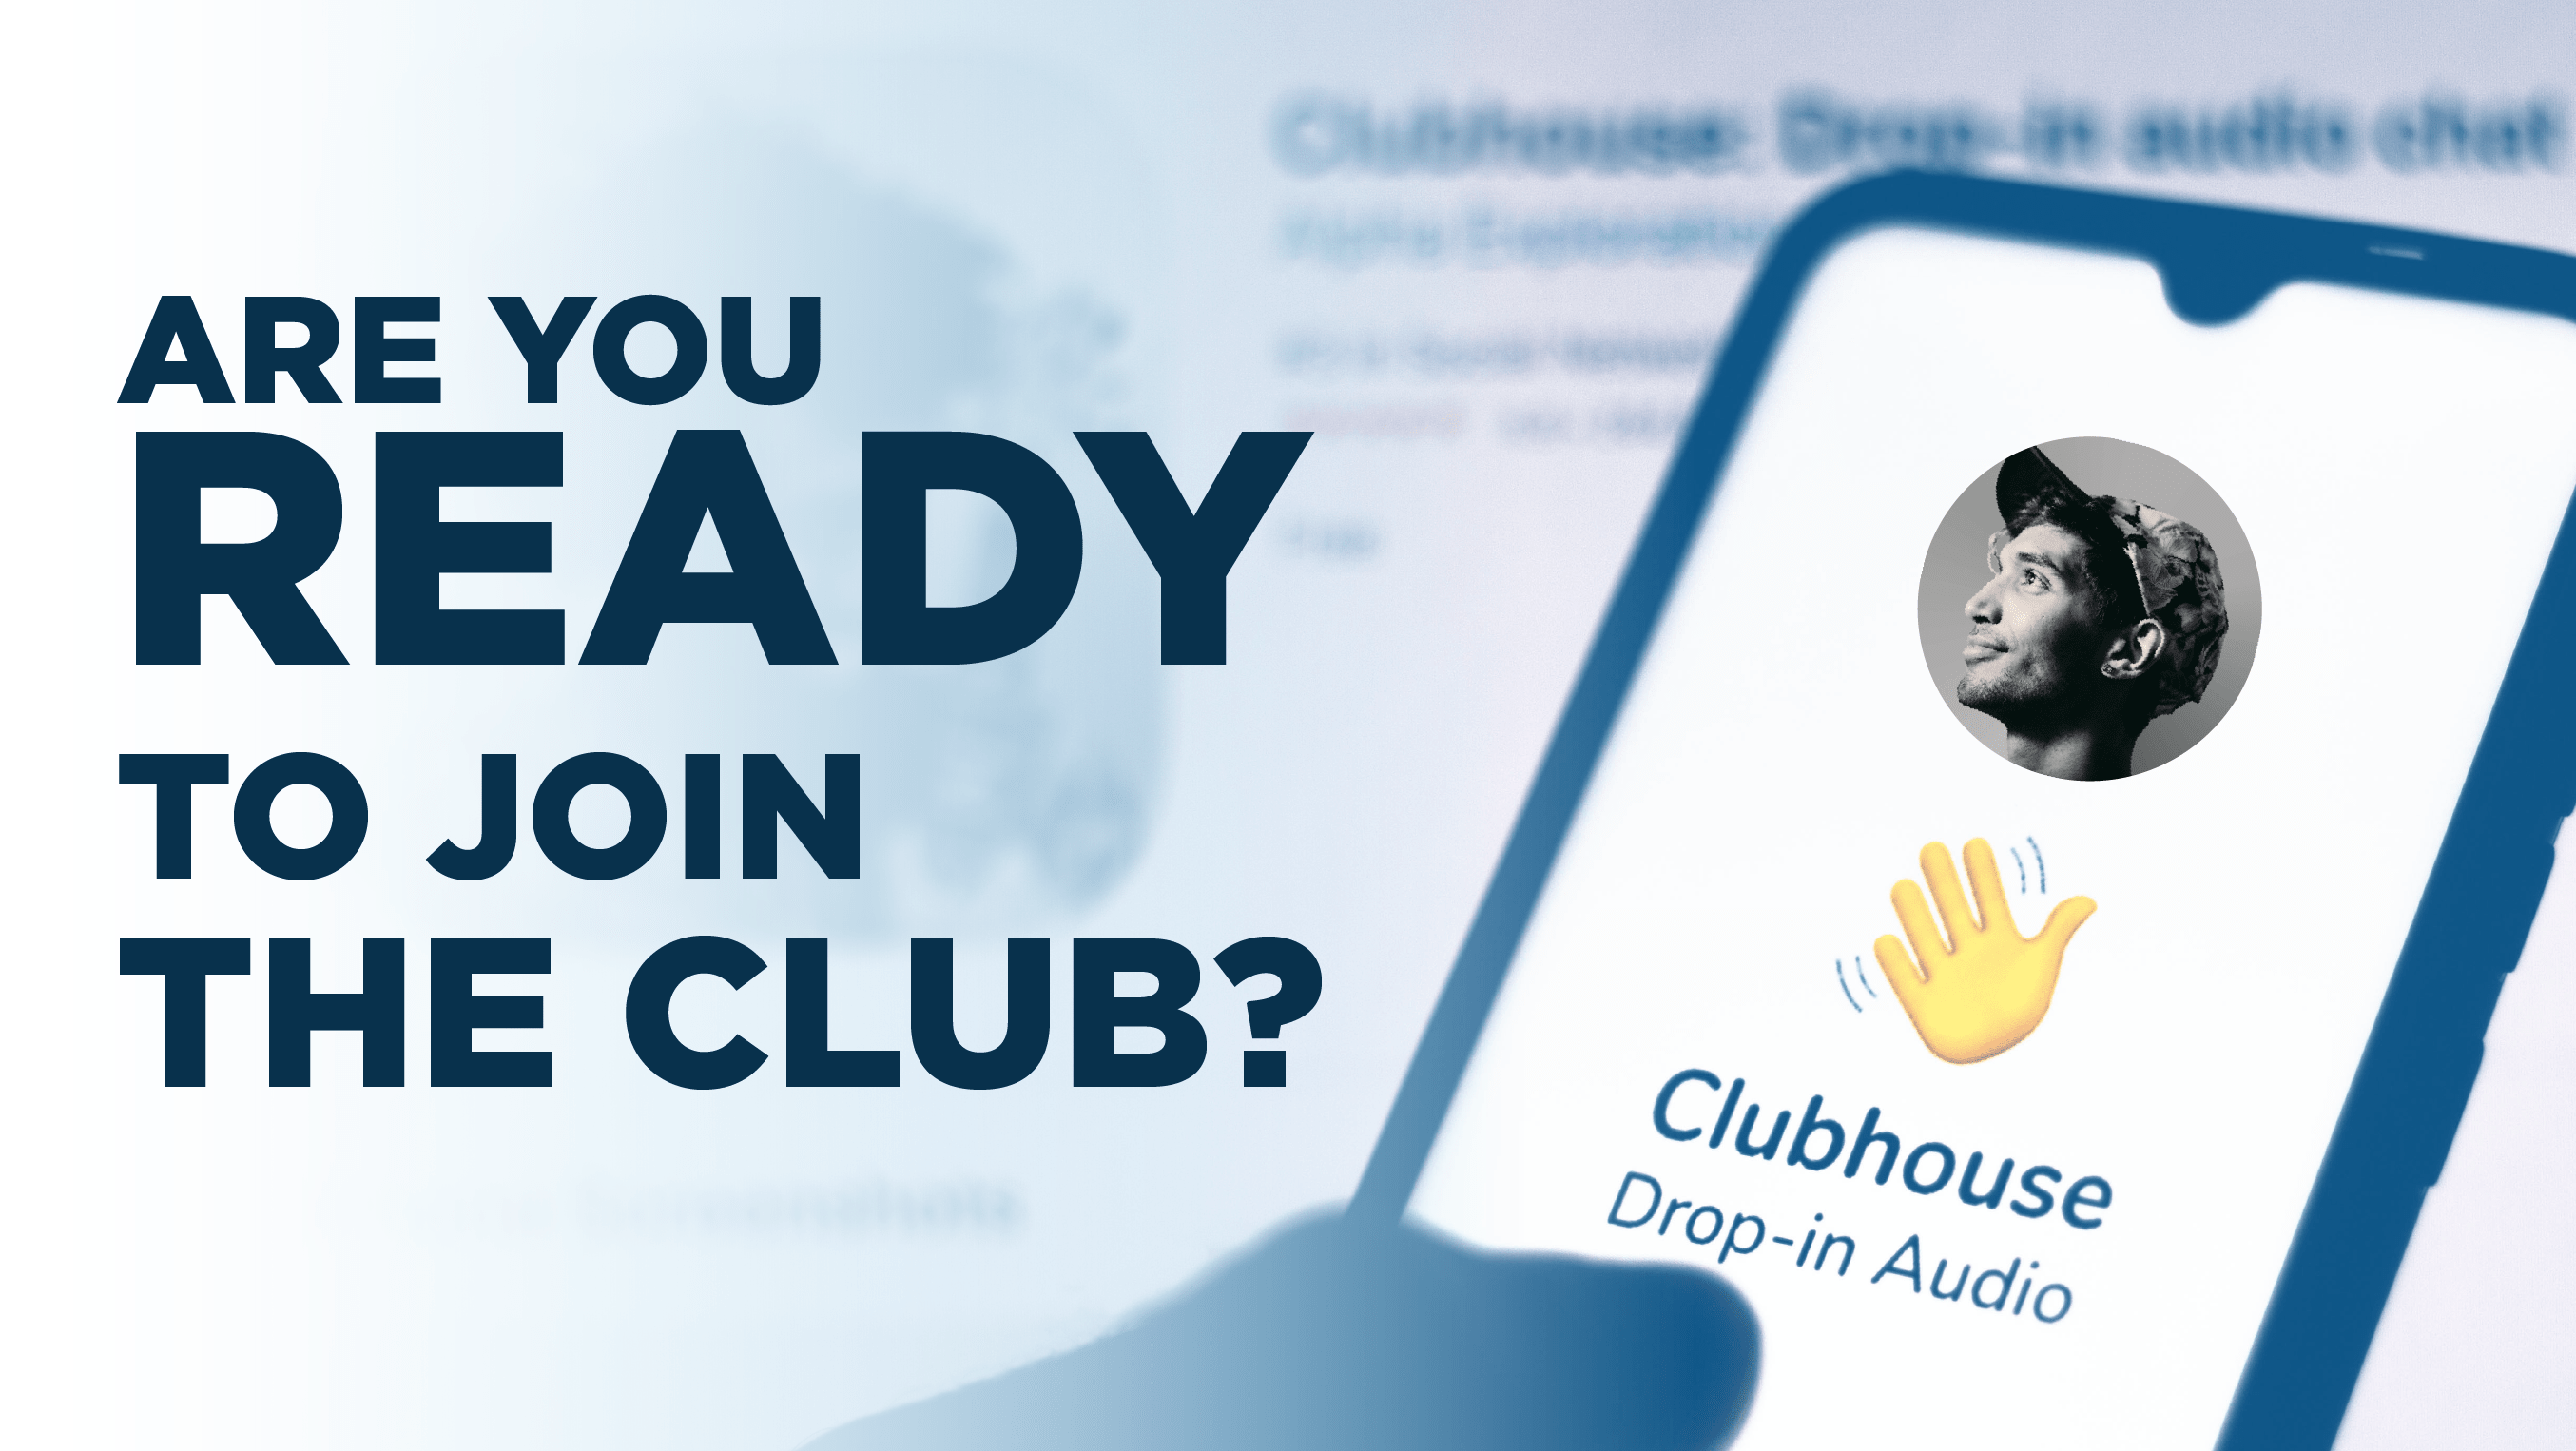 Are you ready to join the Club?